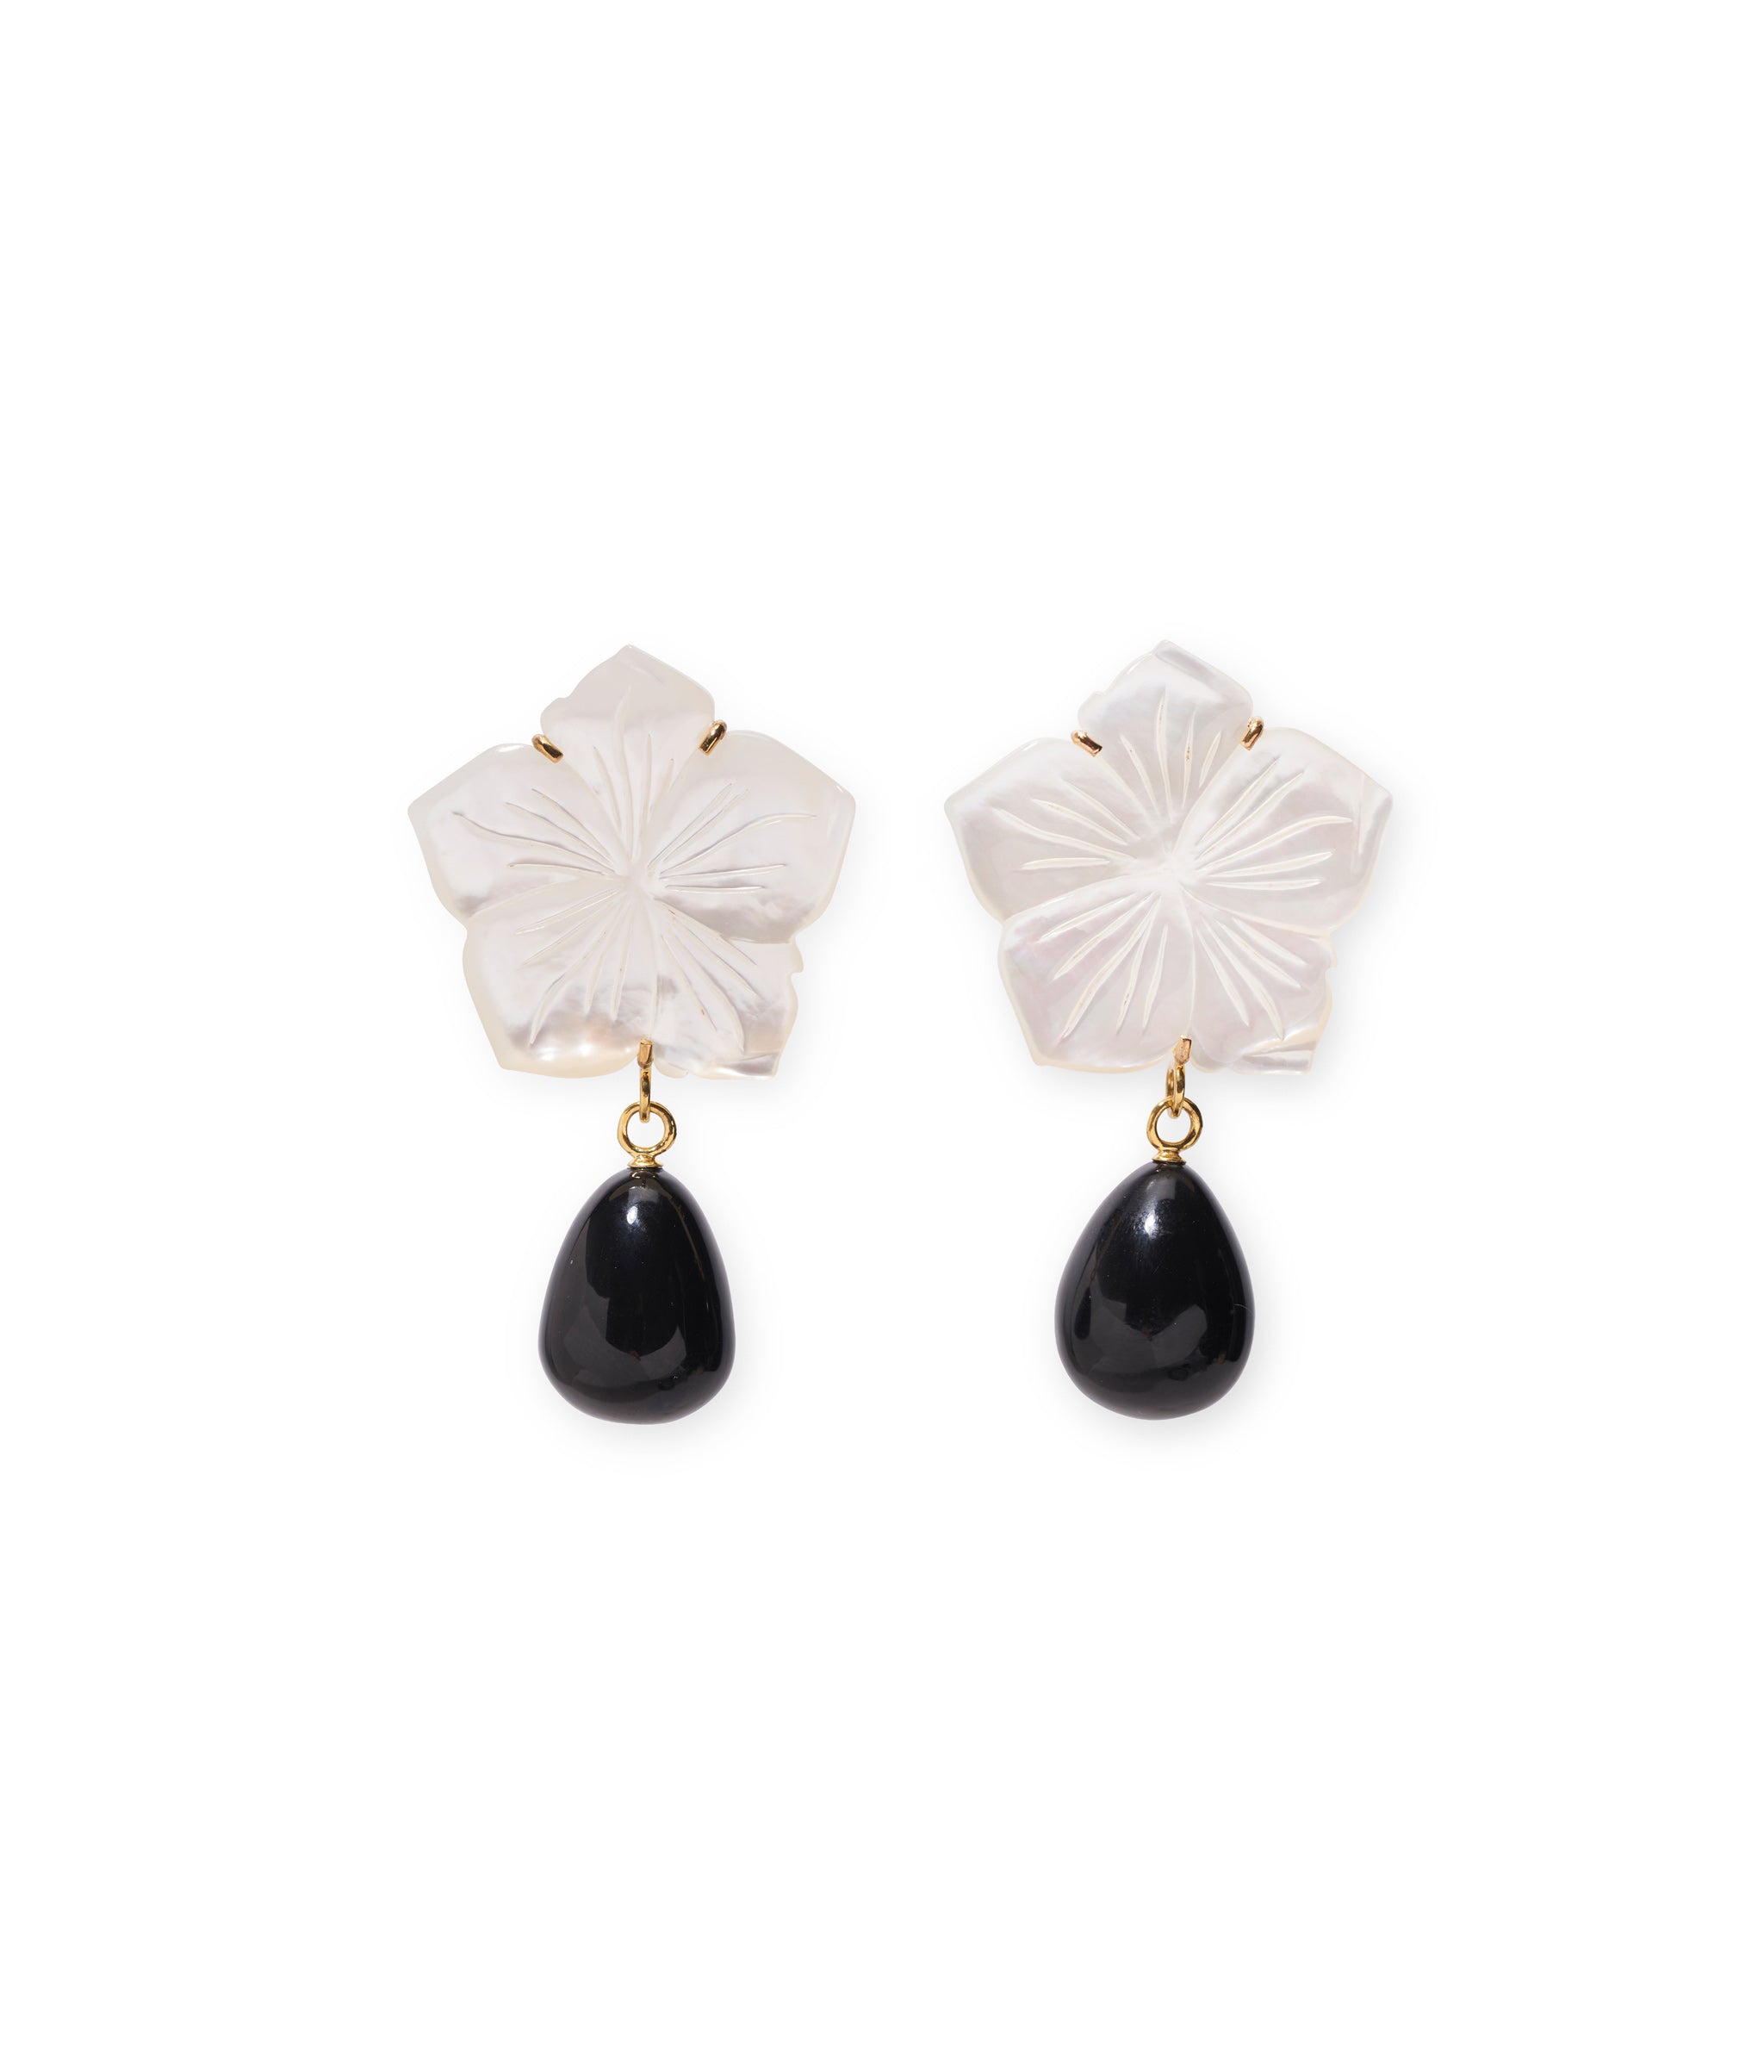 Paper White Earrings. Hand-carved mother-of-pearl flower earrings, with black agate drops.